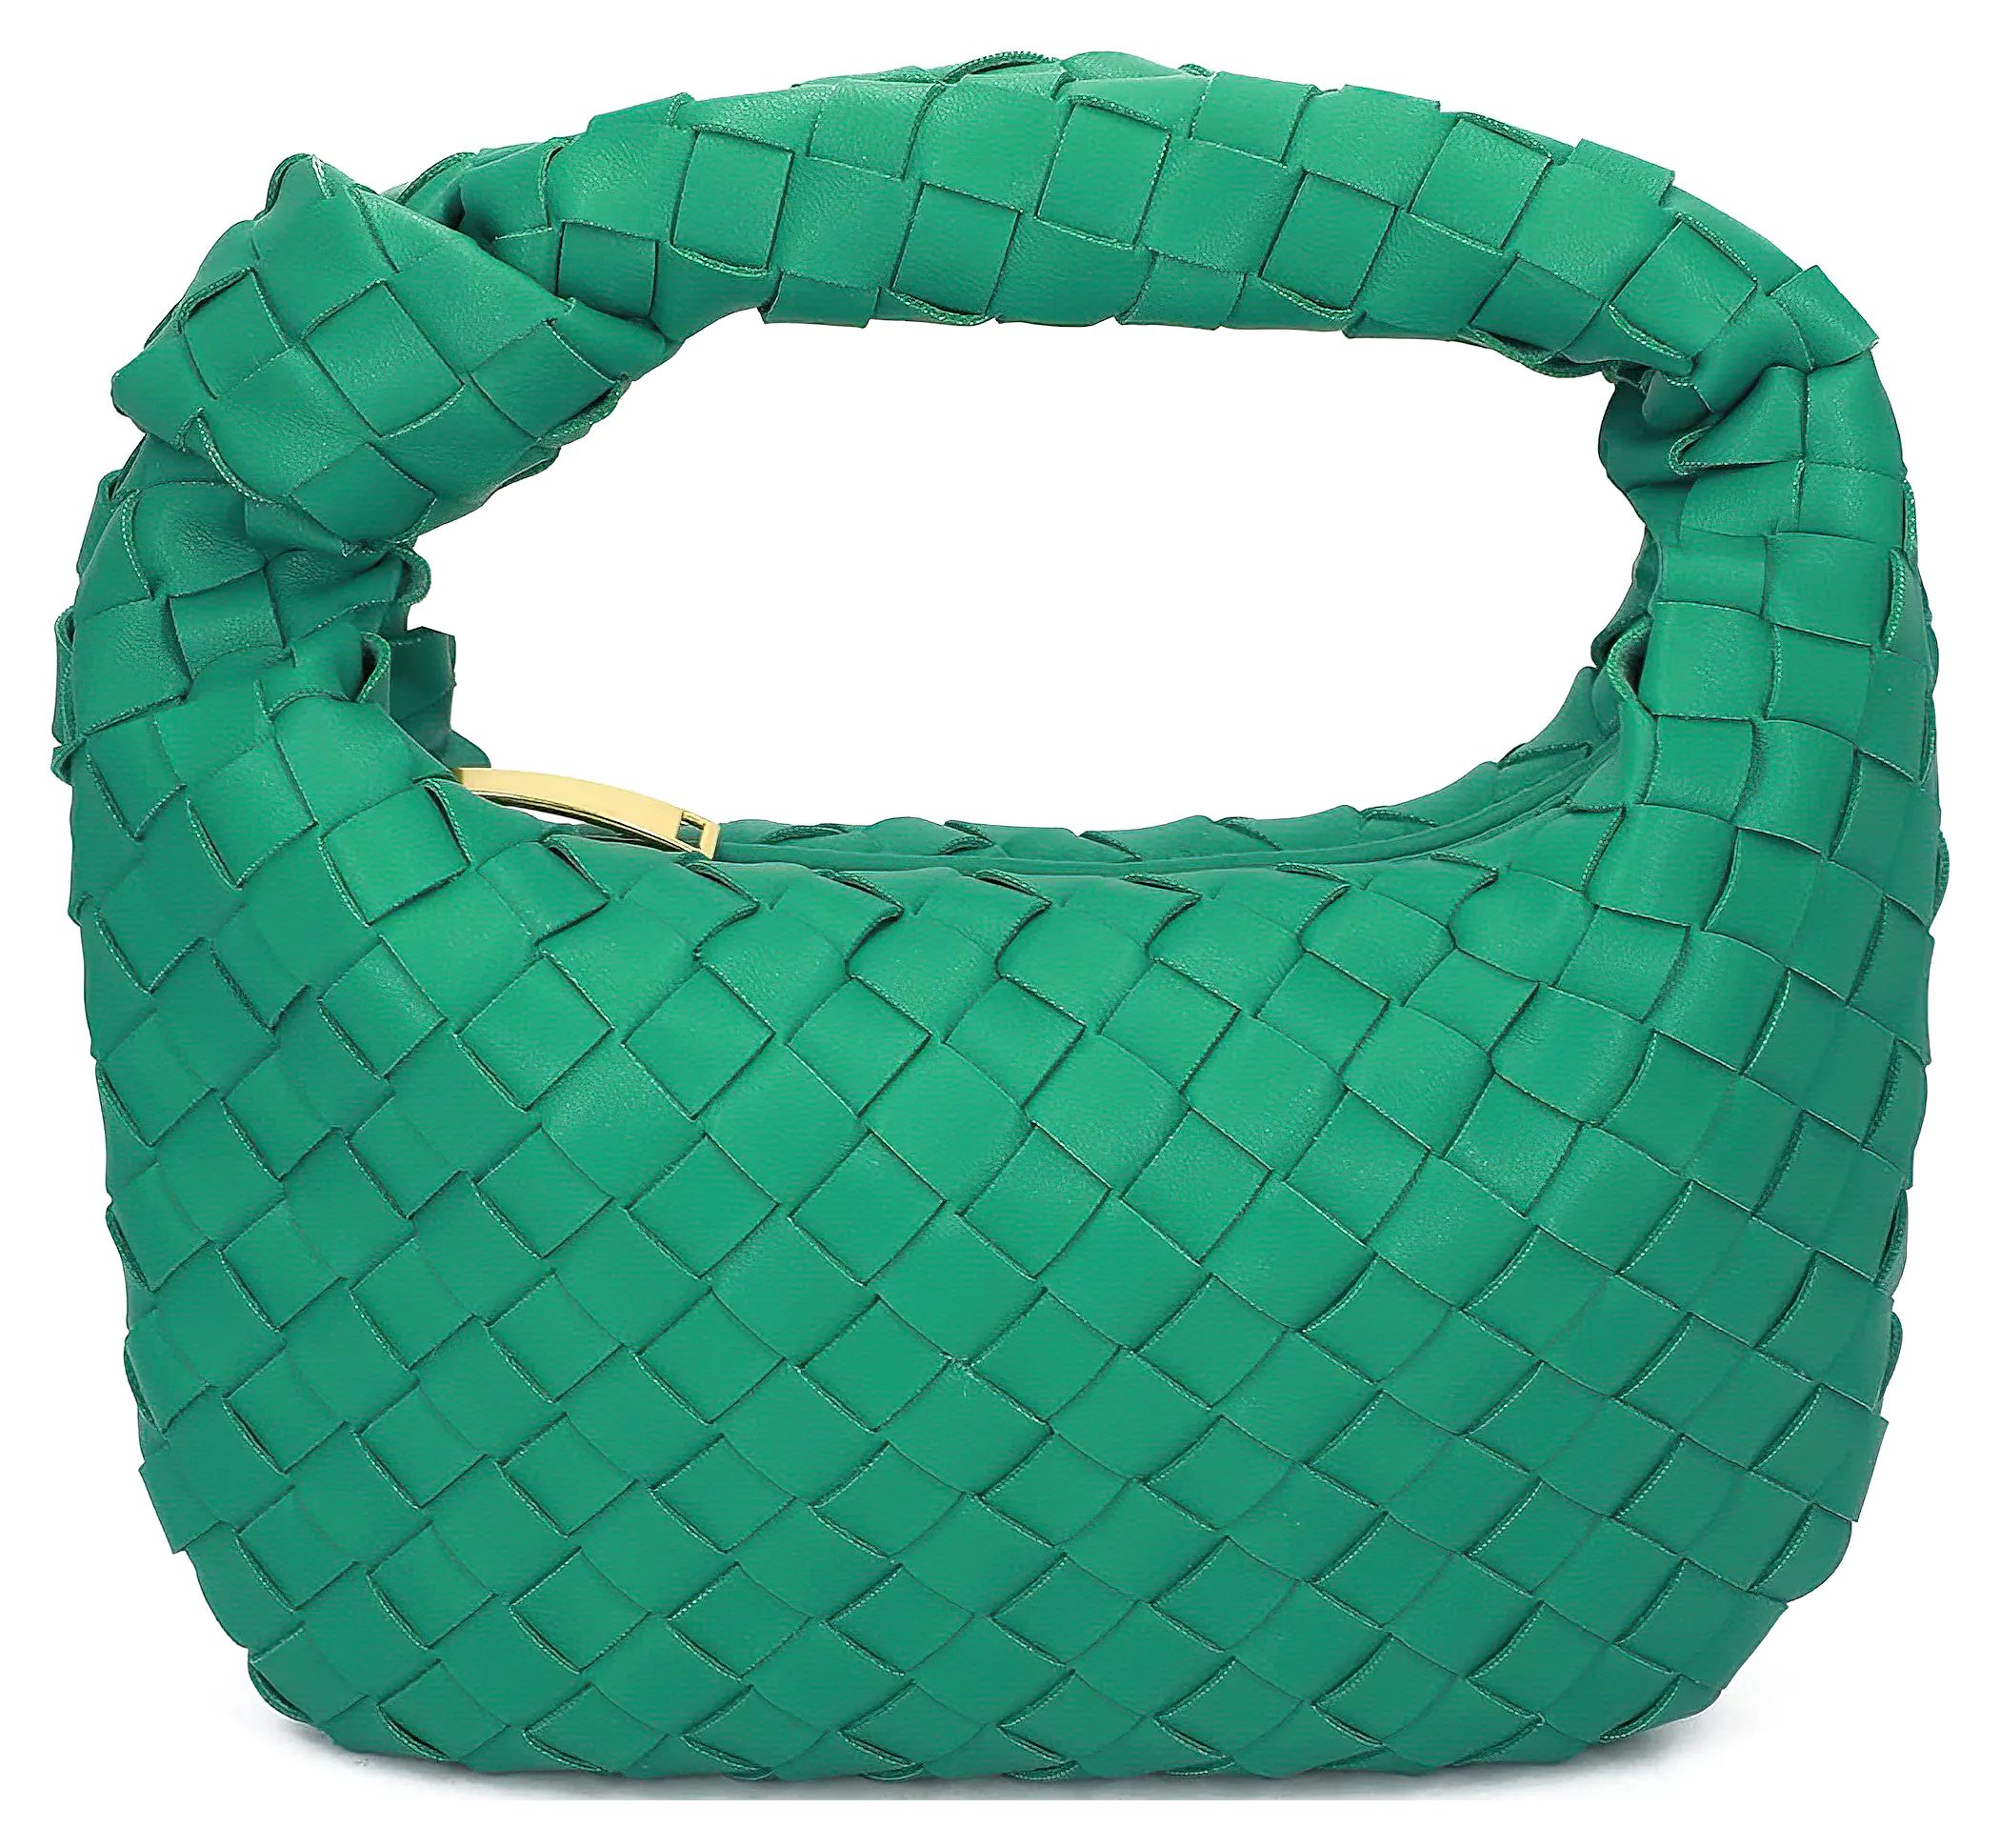 Ykall Knotted Soft Leather Woven Shoulder Handbag